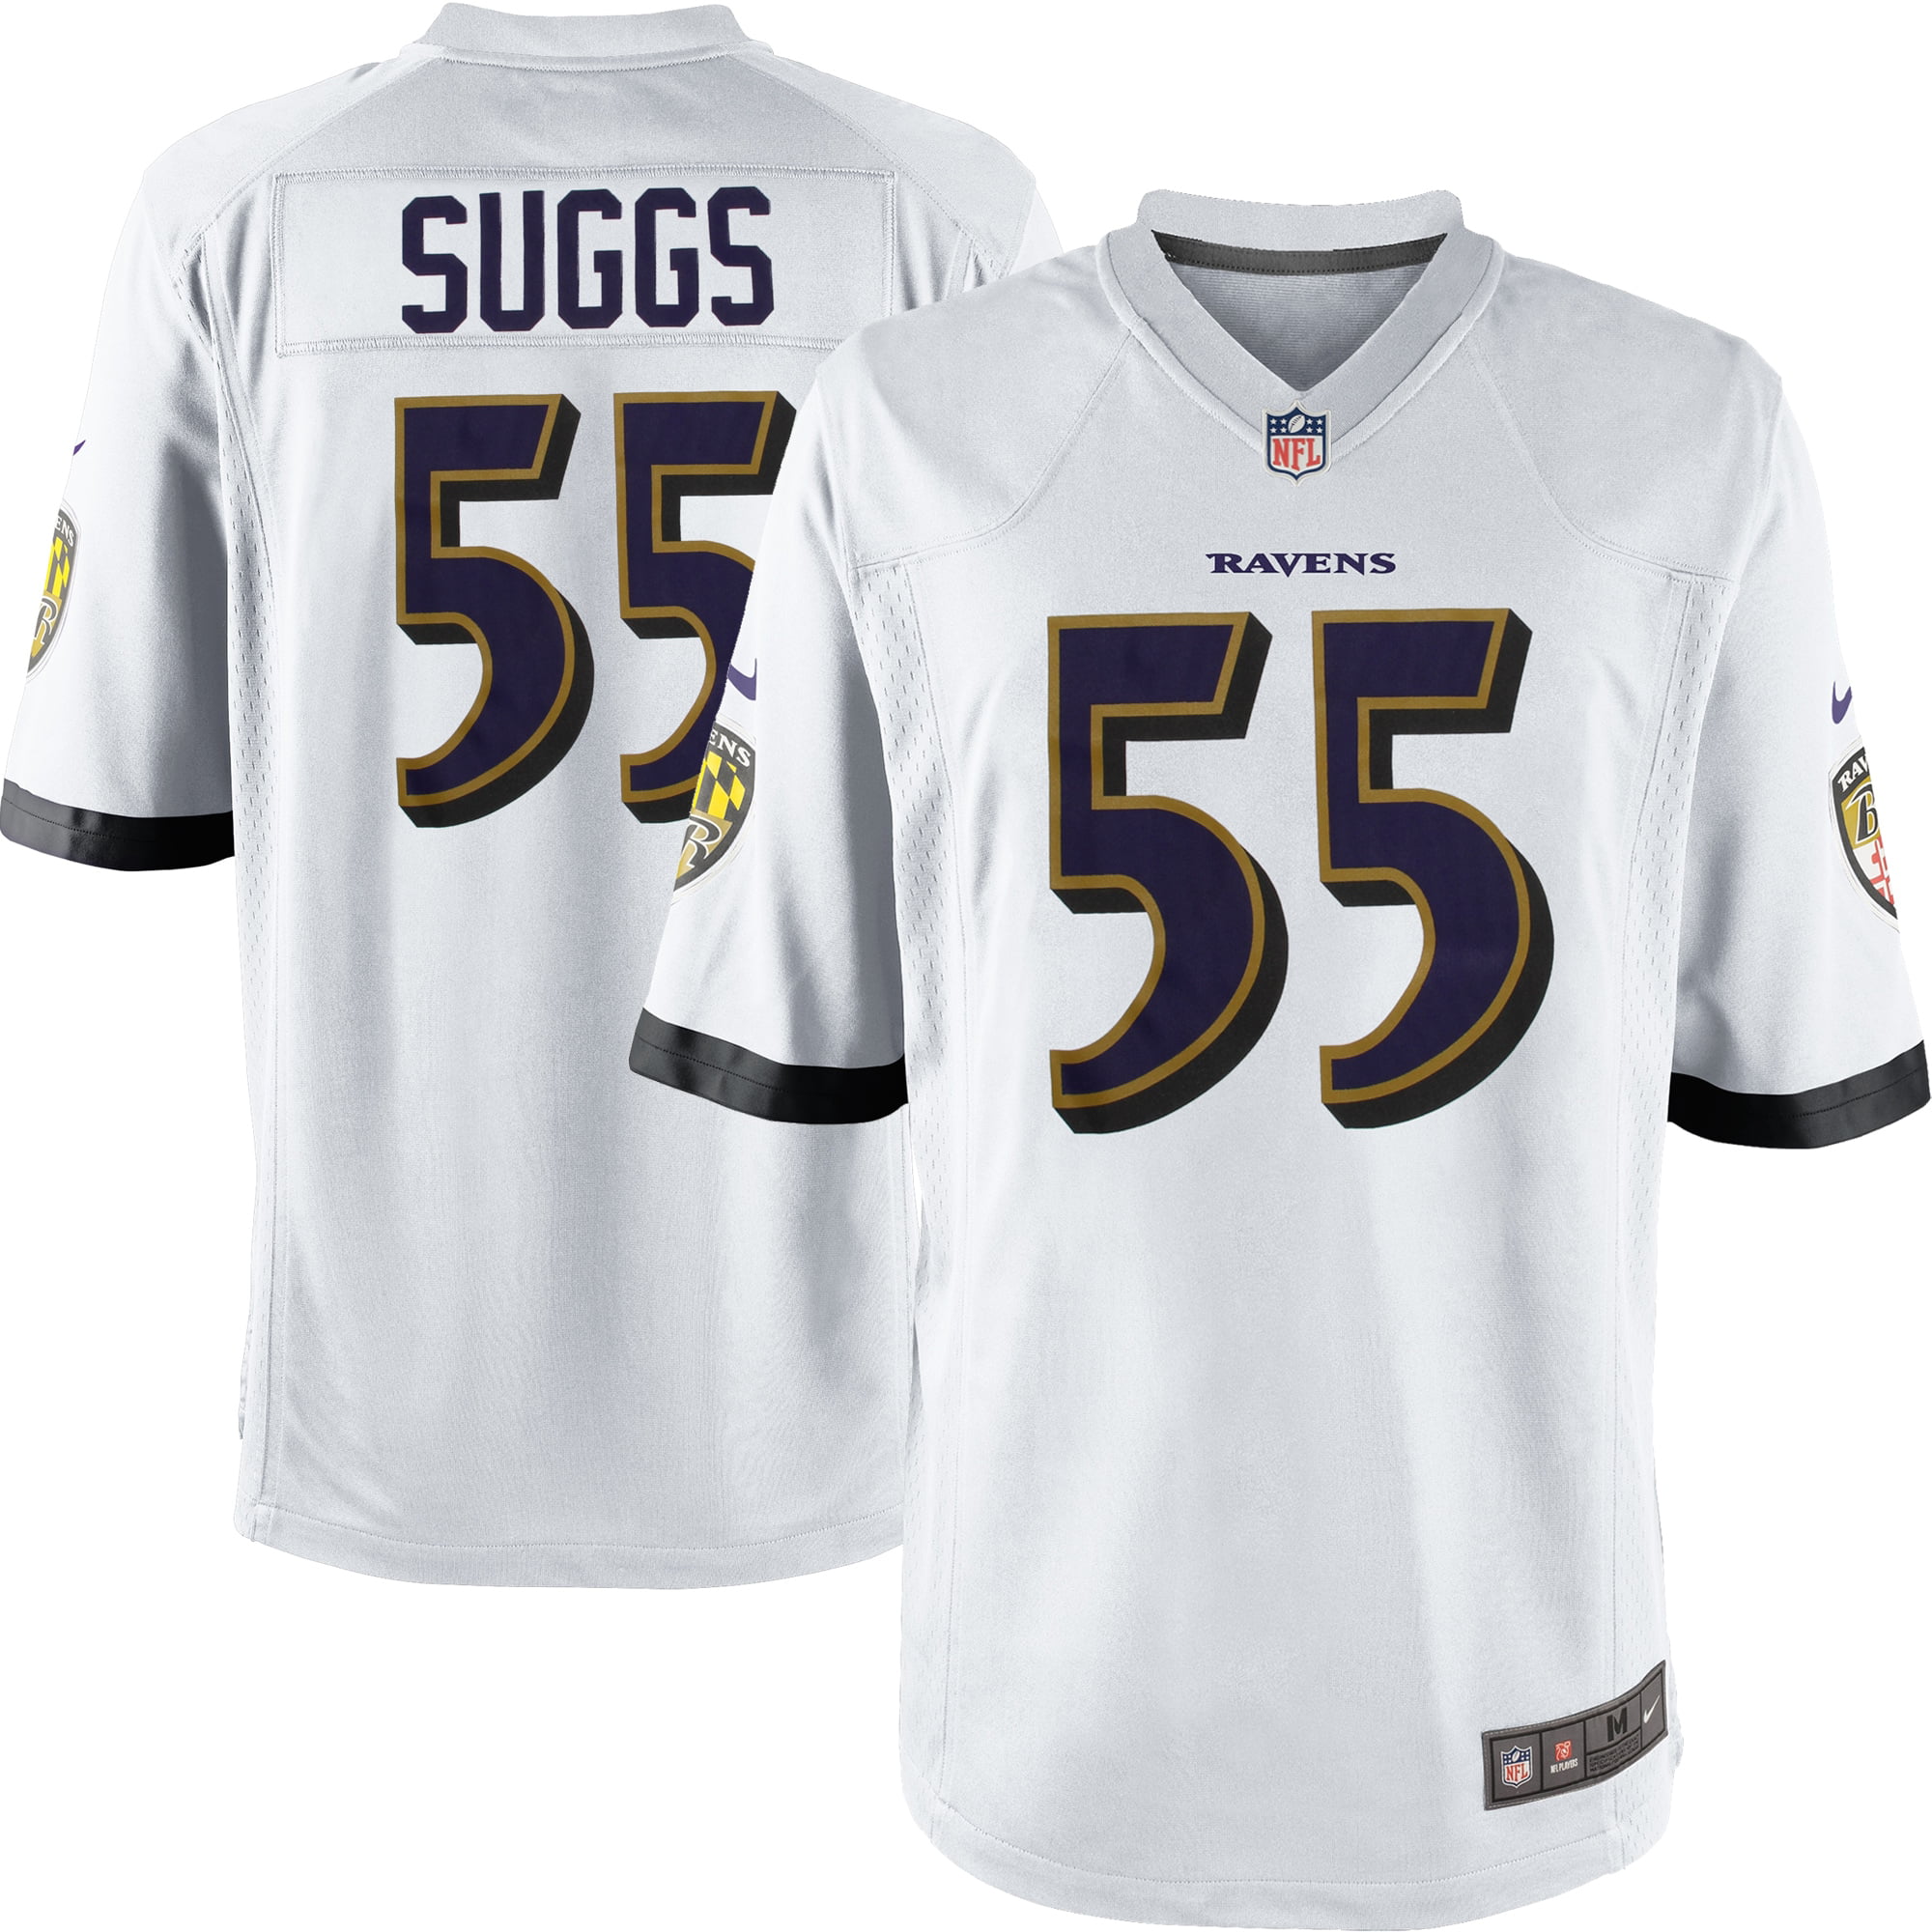 terrell suggs youth jersey